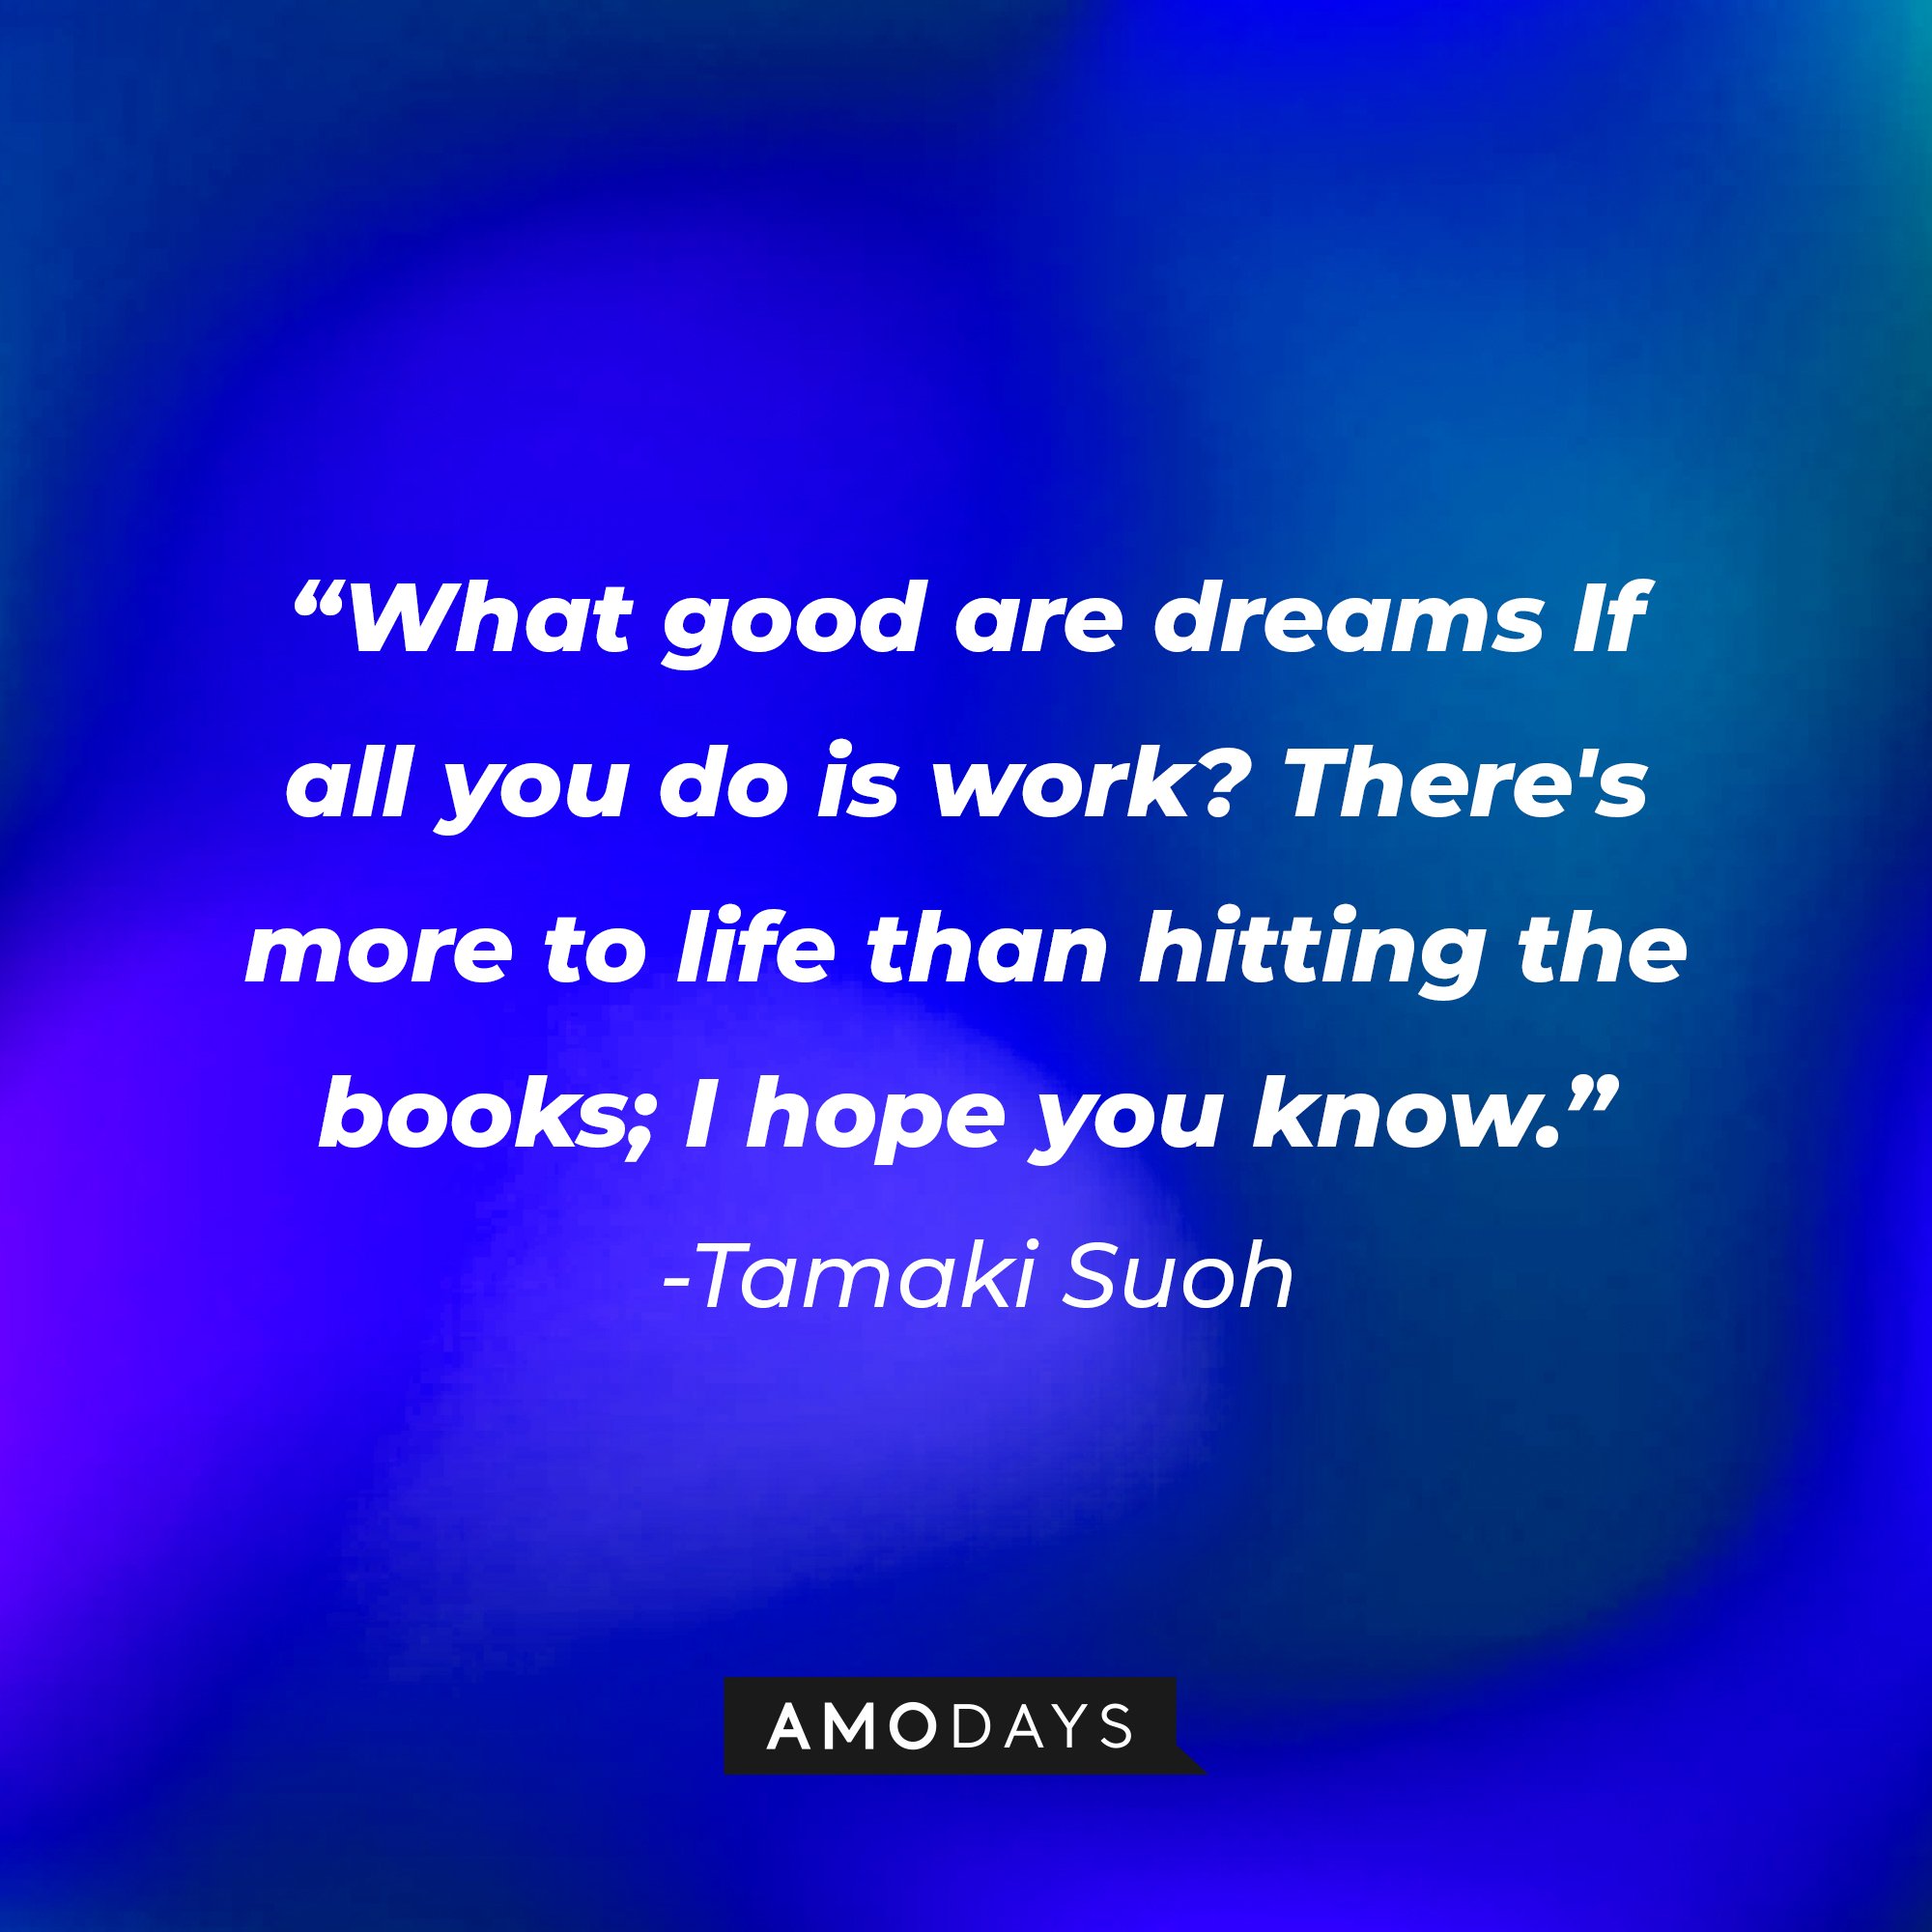 Tamaki Suoh’s quote: "What good are dreams If all you do is work? There's more to life than hitting the books; I hope you know." | Image: AmoDays